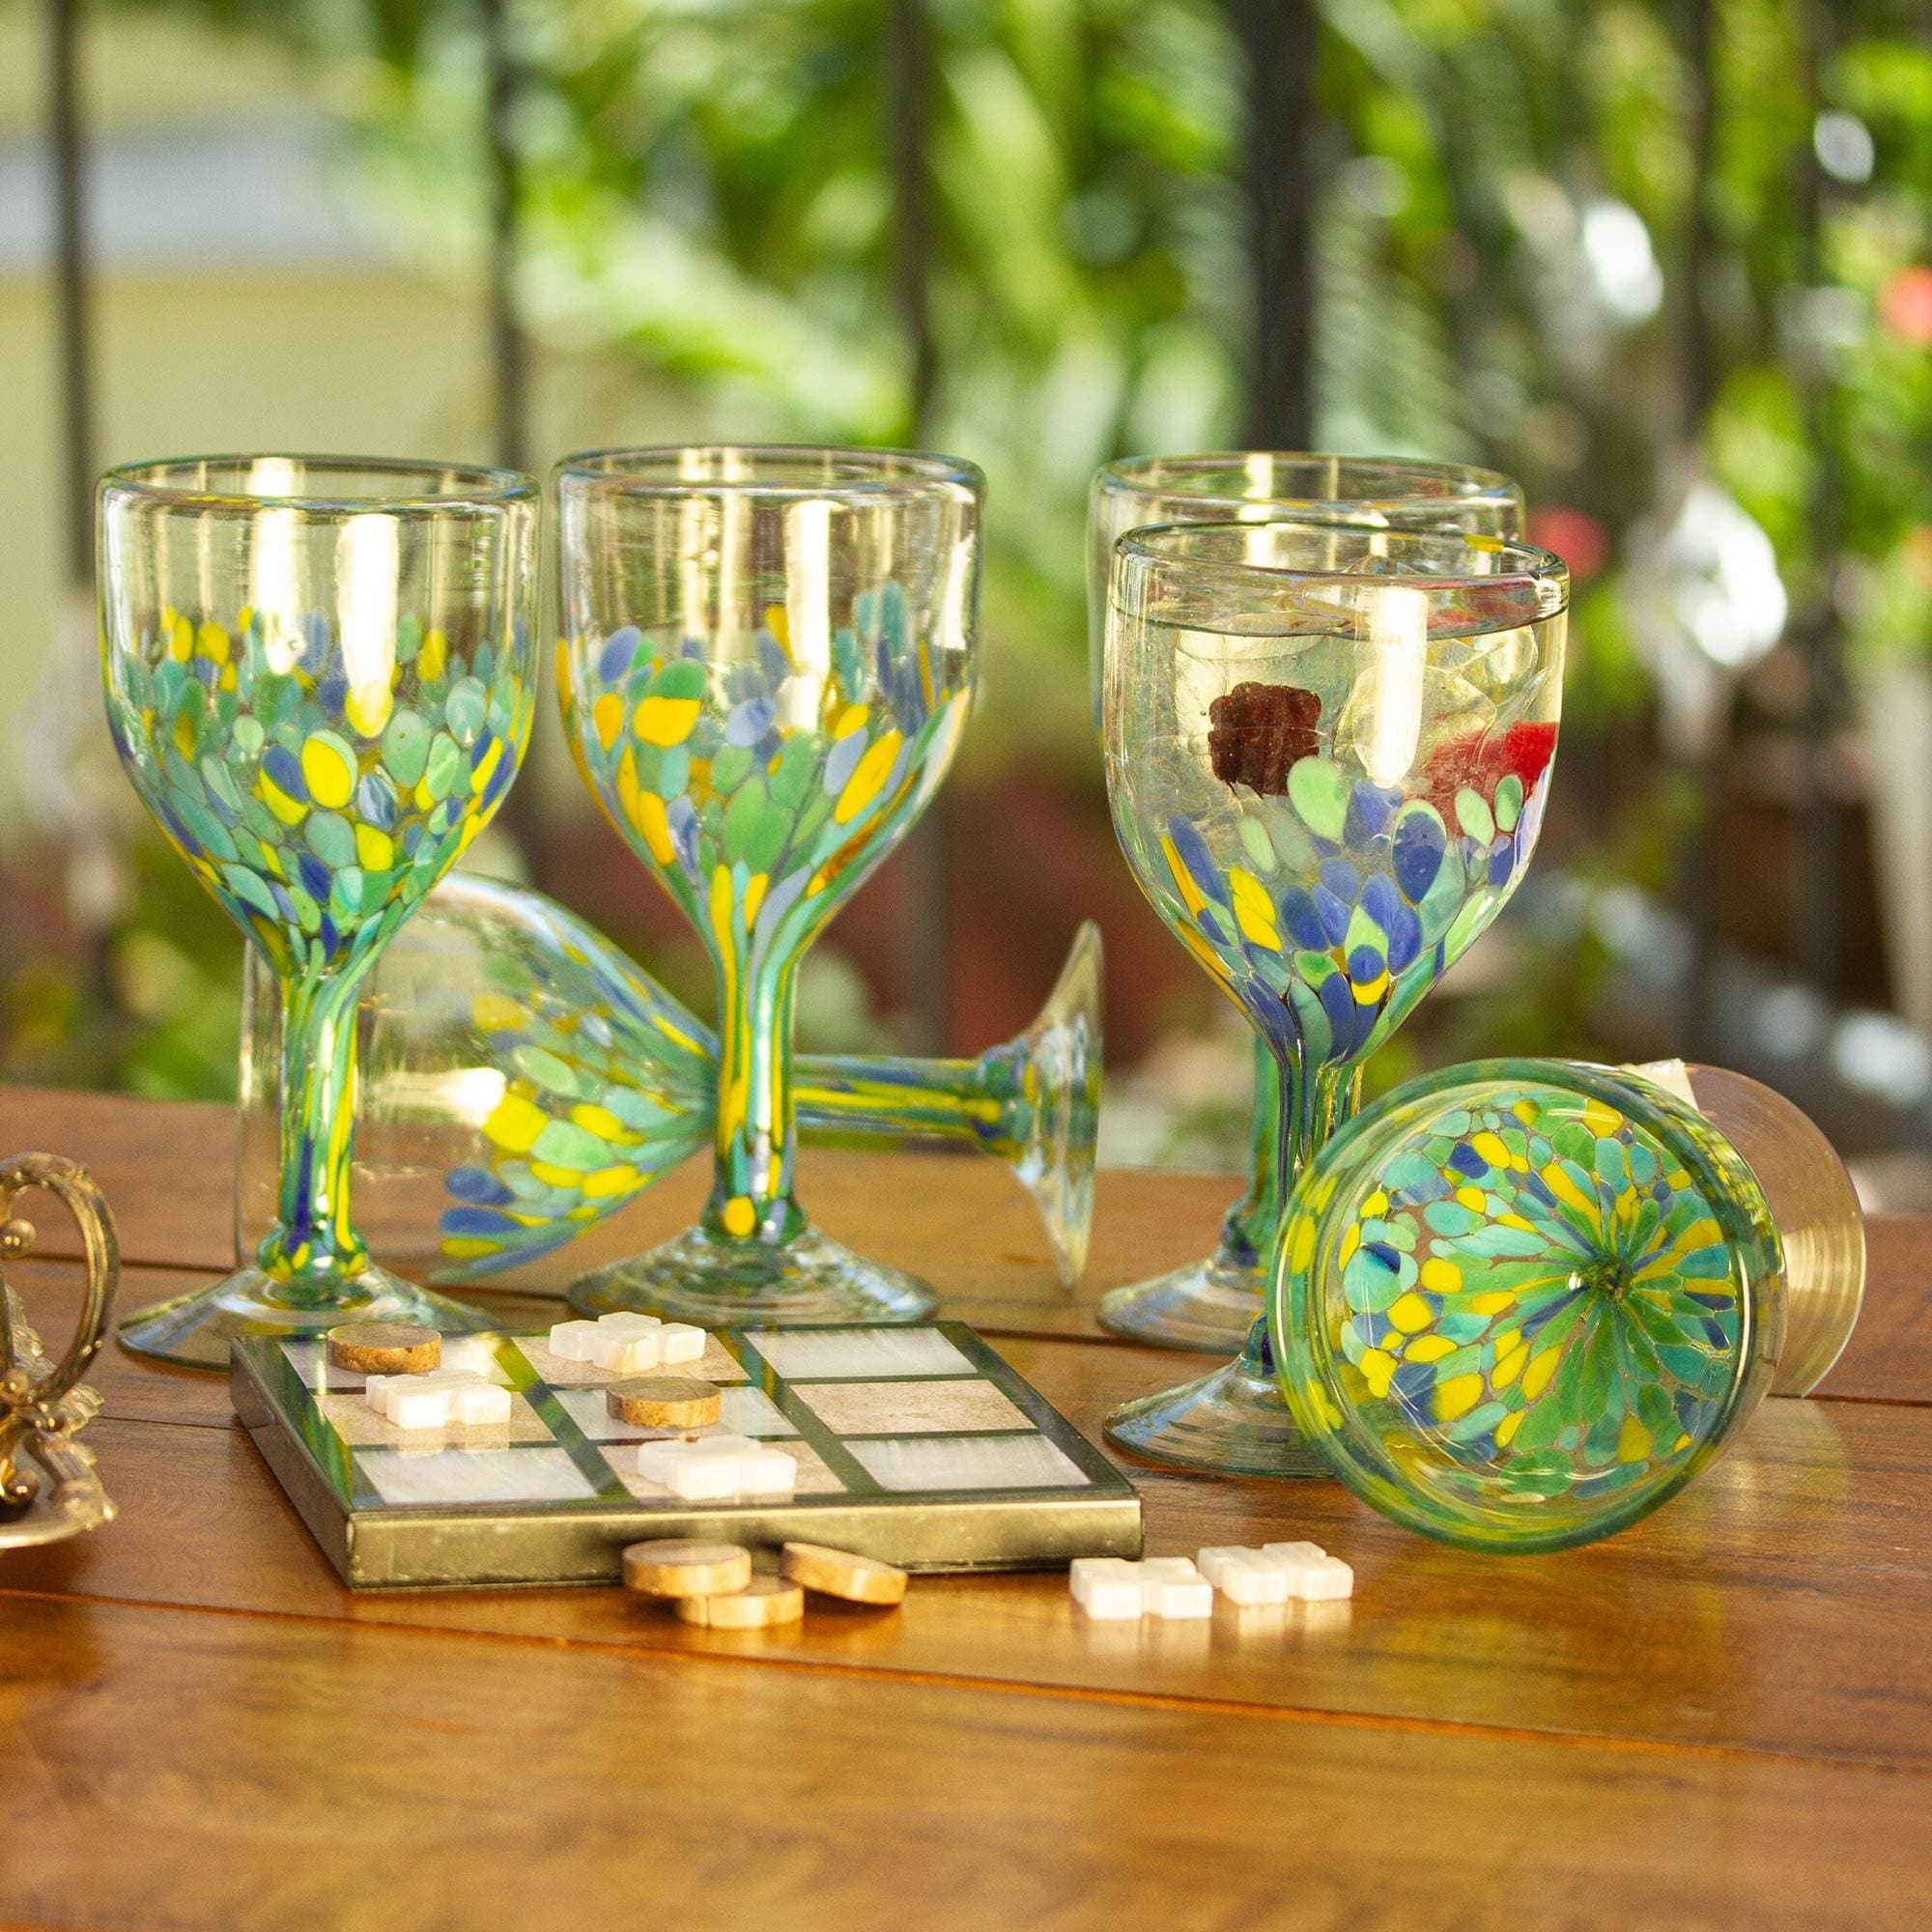 https://ak1.ostkcdn.com/images/products/is/images/direct/2e8acc8603ba8a6fc7b74f217a5ba169978b7387/Handmade-Tropical-Confetti-glass-wine-glasses-%28Mexico%29.jpg